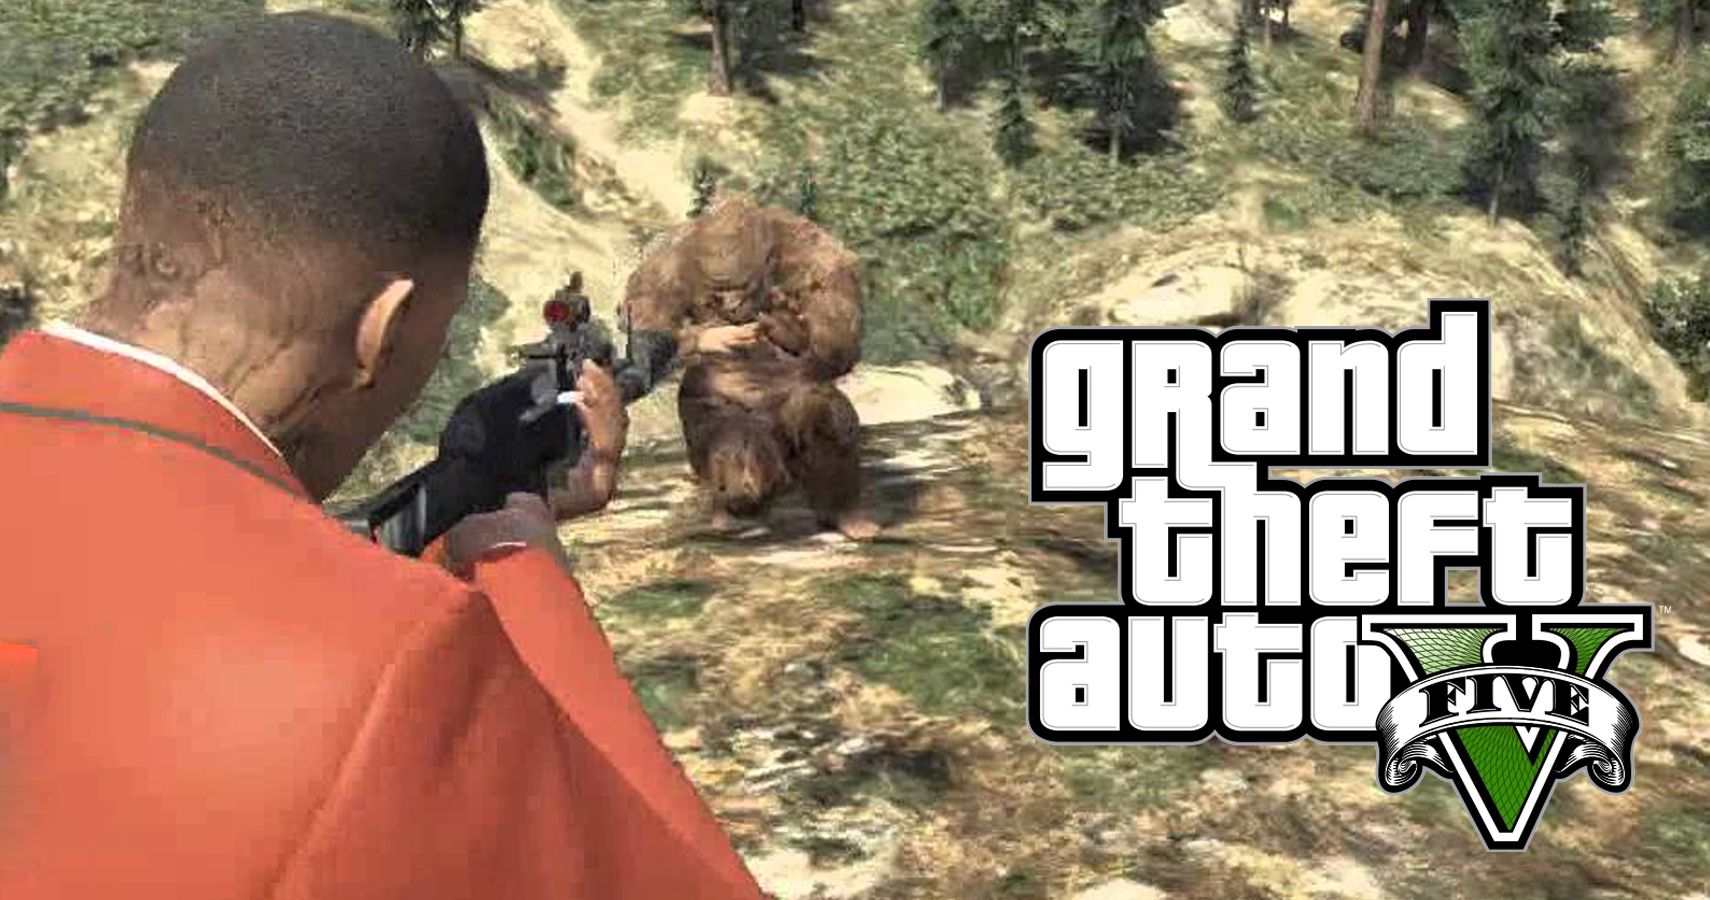 15 Awesome Missions In Gta V You Didn T Know About